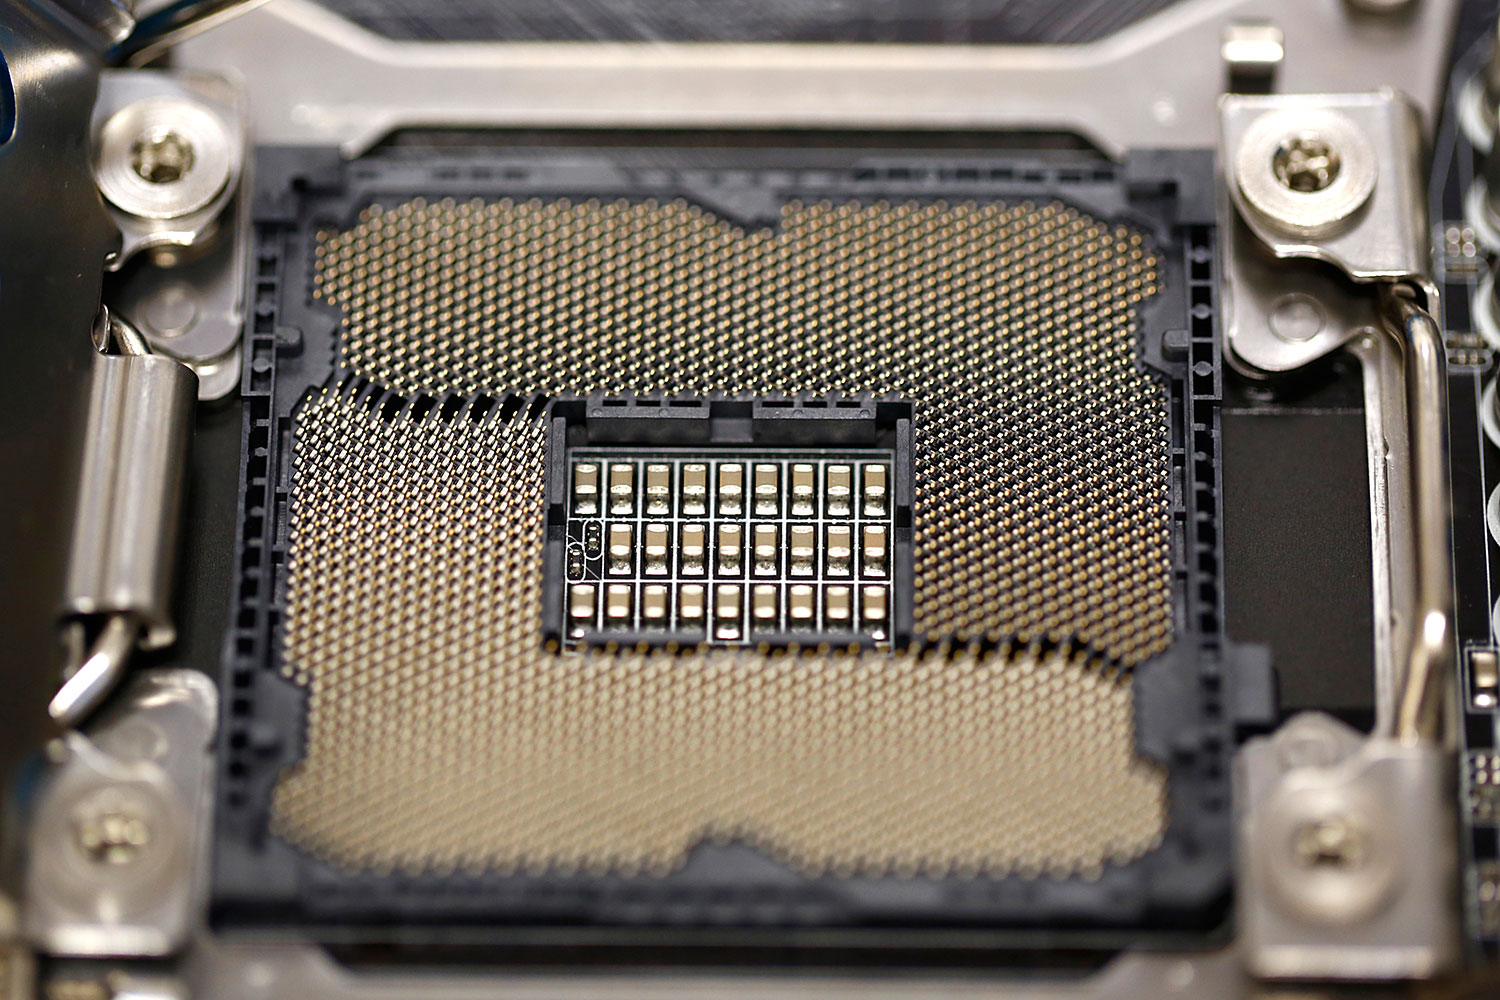 A close-up of all the many pins and connection points on the microprocessor socket.